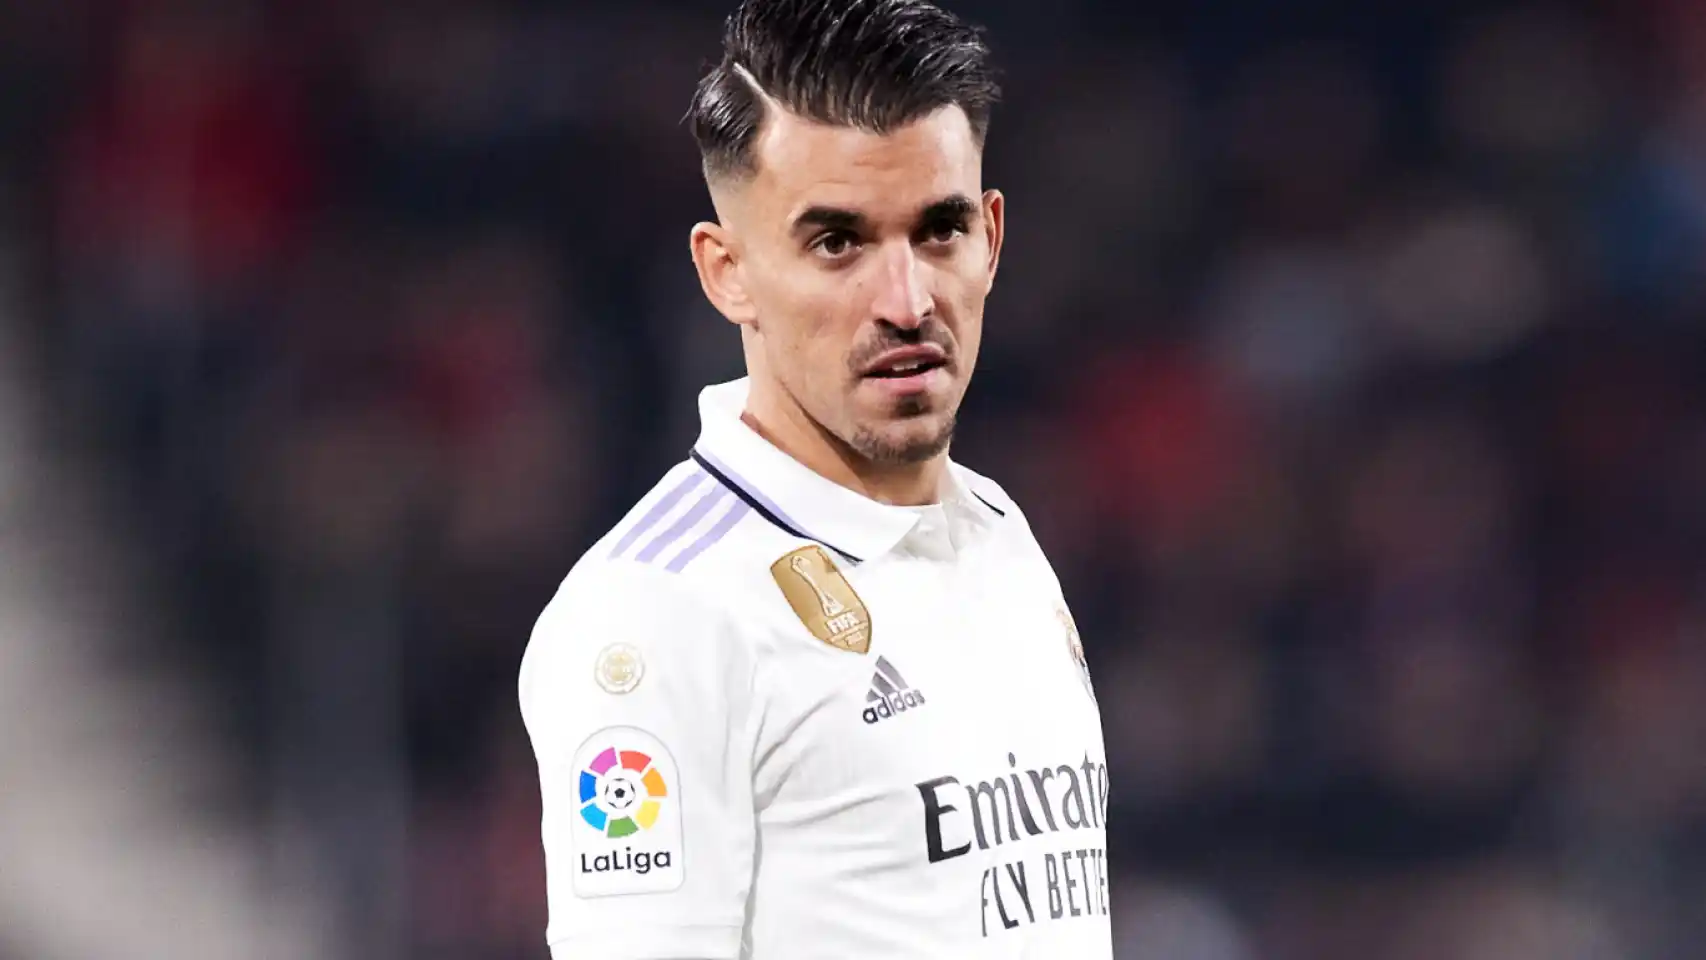 Dani Ceballos on the verge of betraying Florentino Pérez: he can go to Real Madrid's worst rival
	
